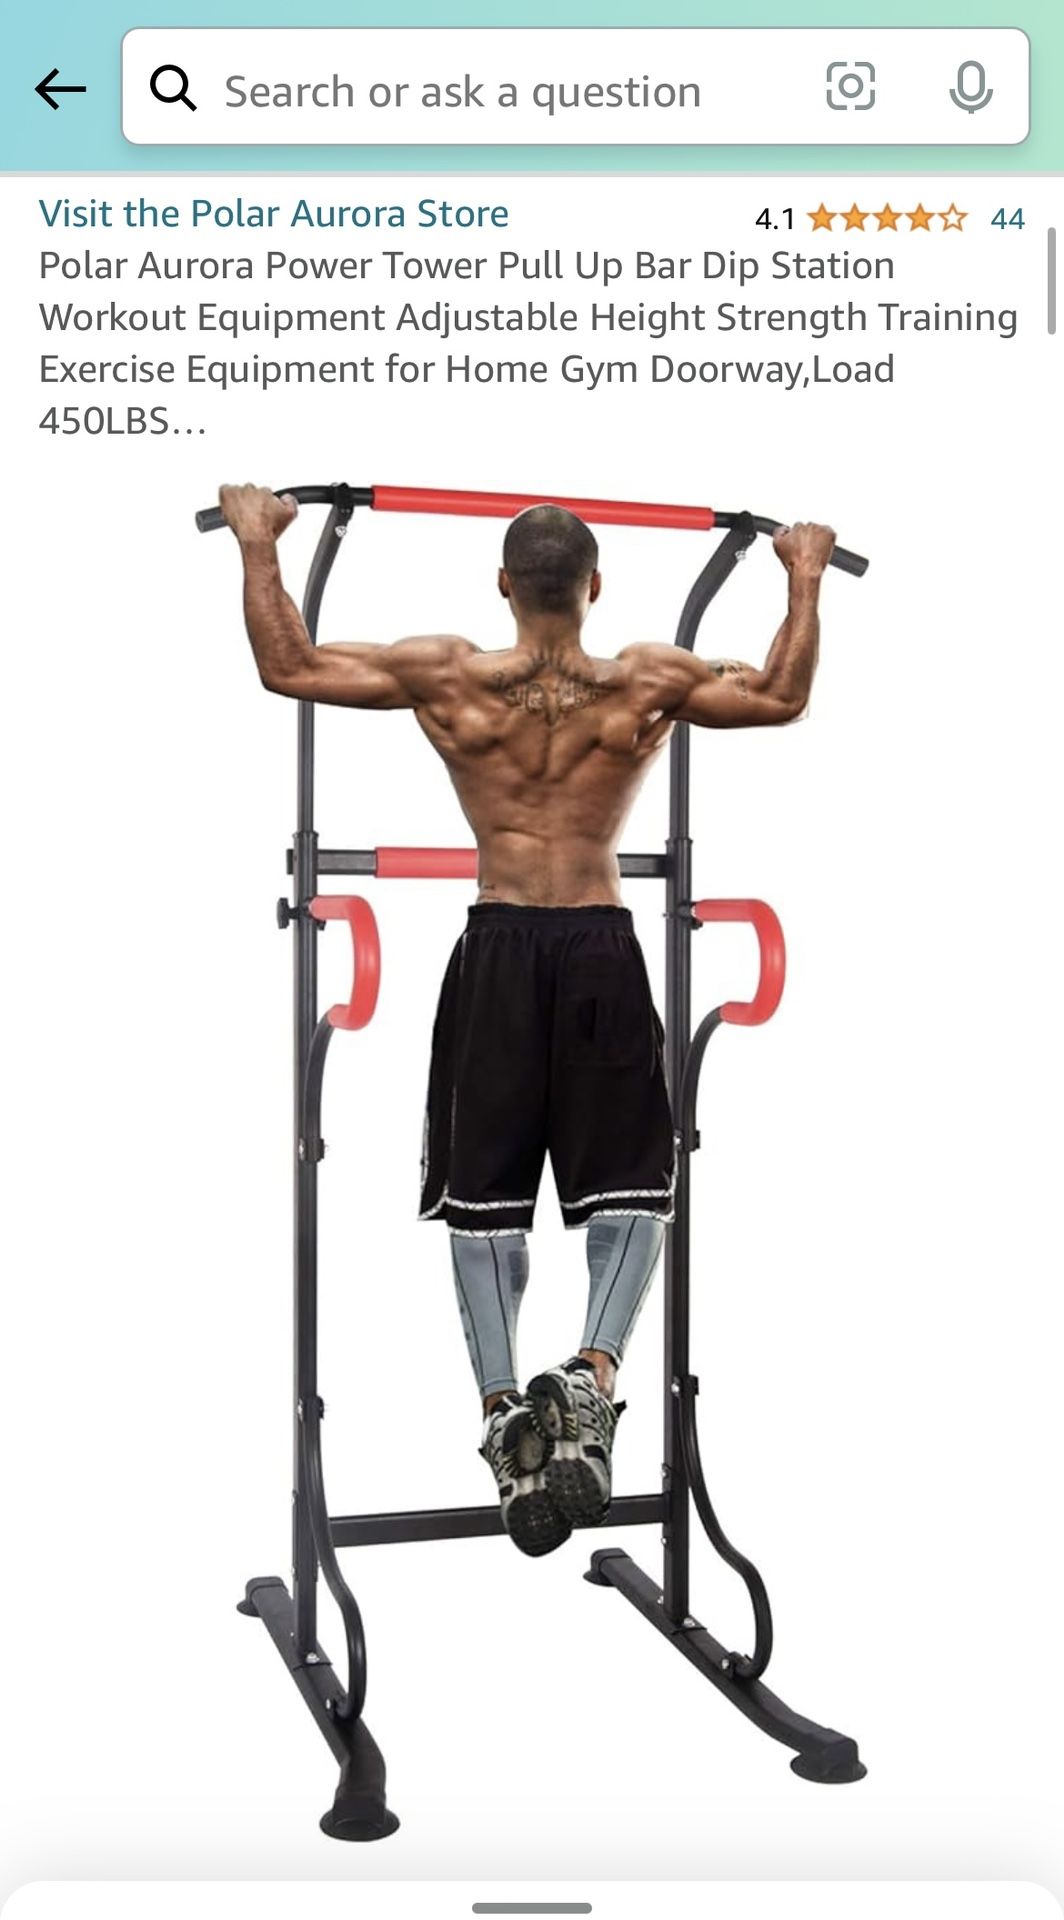  Power Tower Pull Up Bar Dip Station 